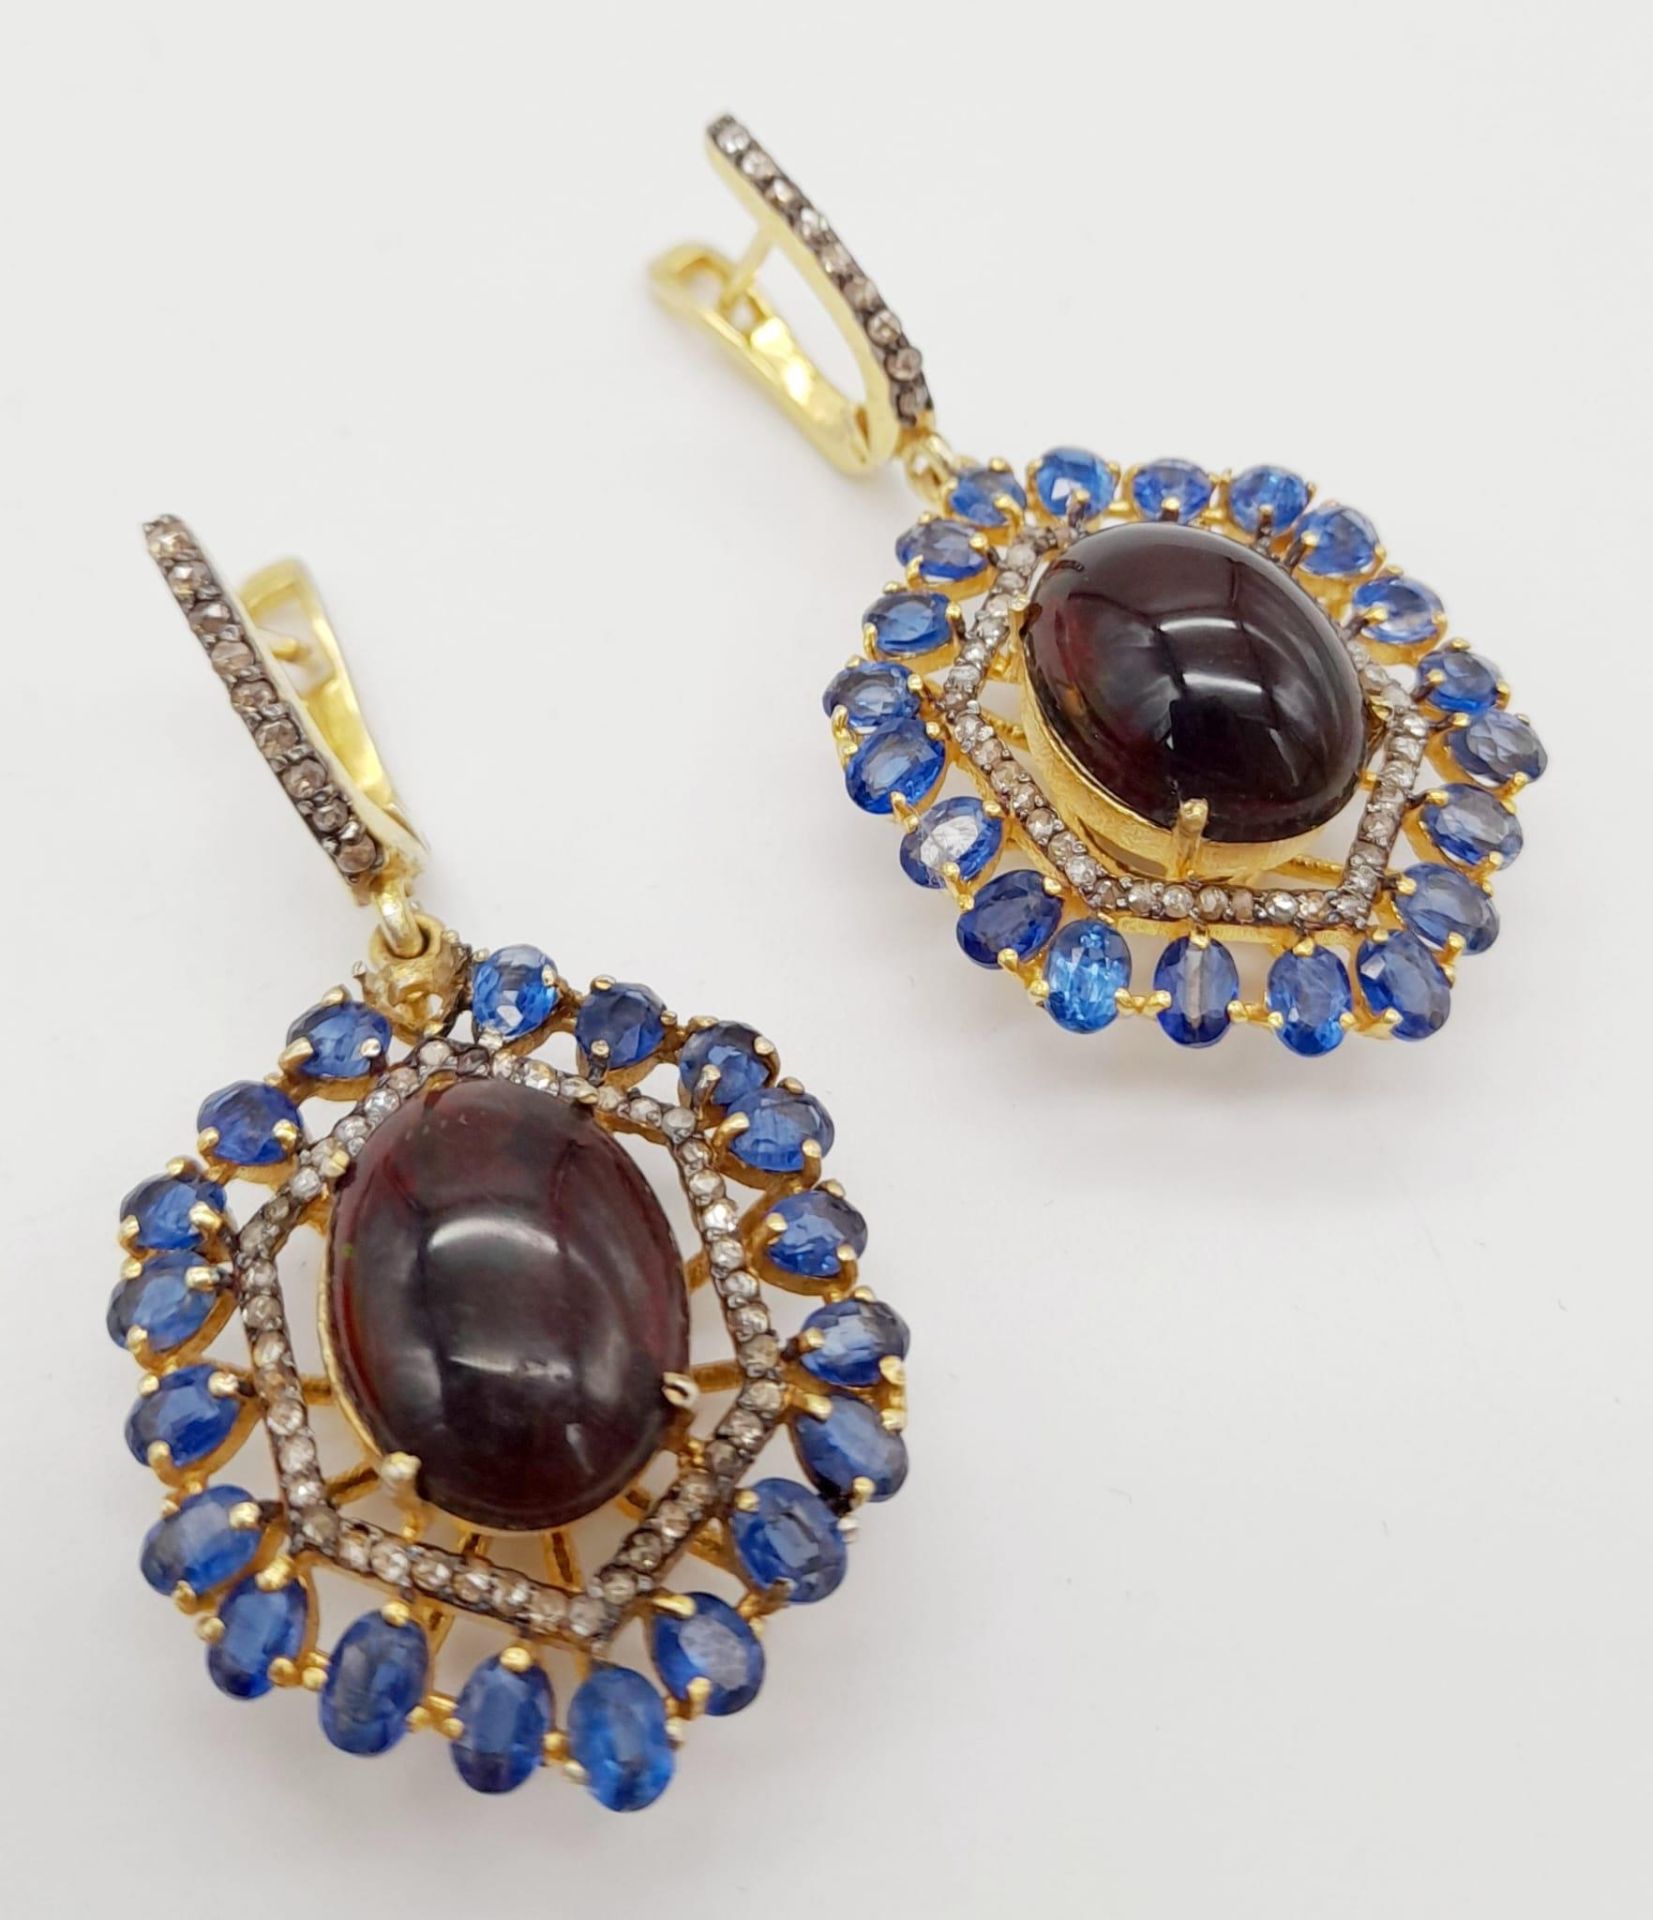 A Pair of Fire Opal and Kyanite Gemstone Hexagonal Drop Earrings. Set in gold plated 925 silver. - Image 2 of 7